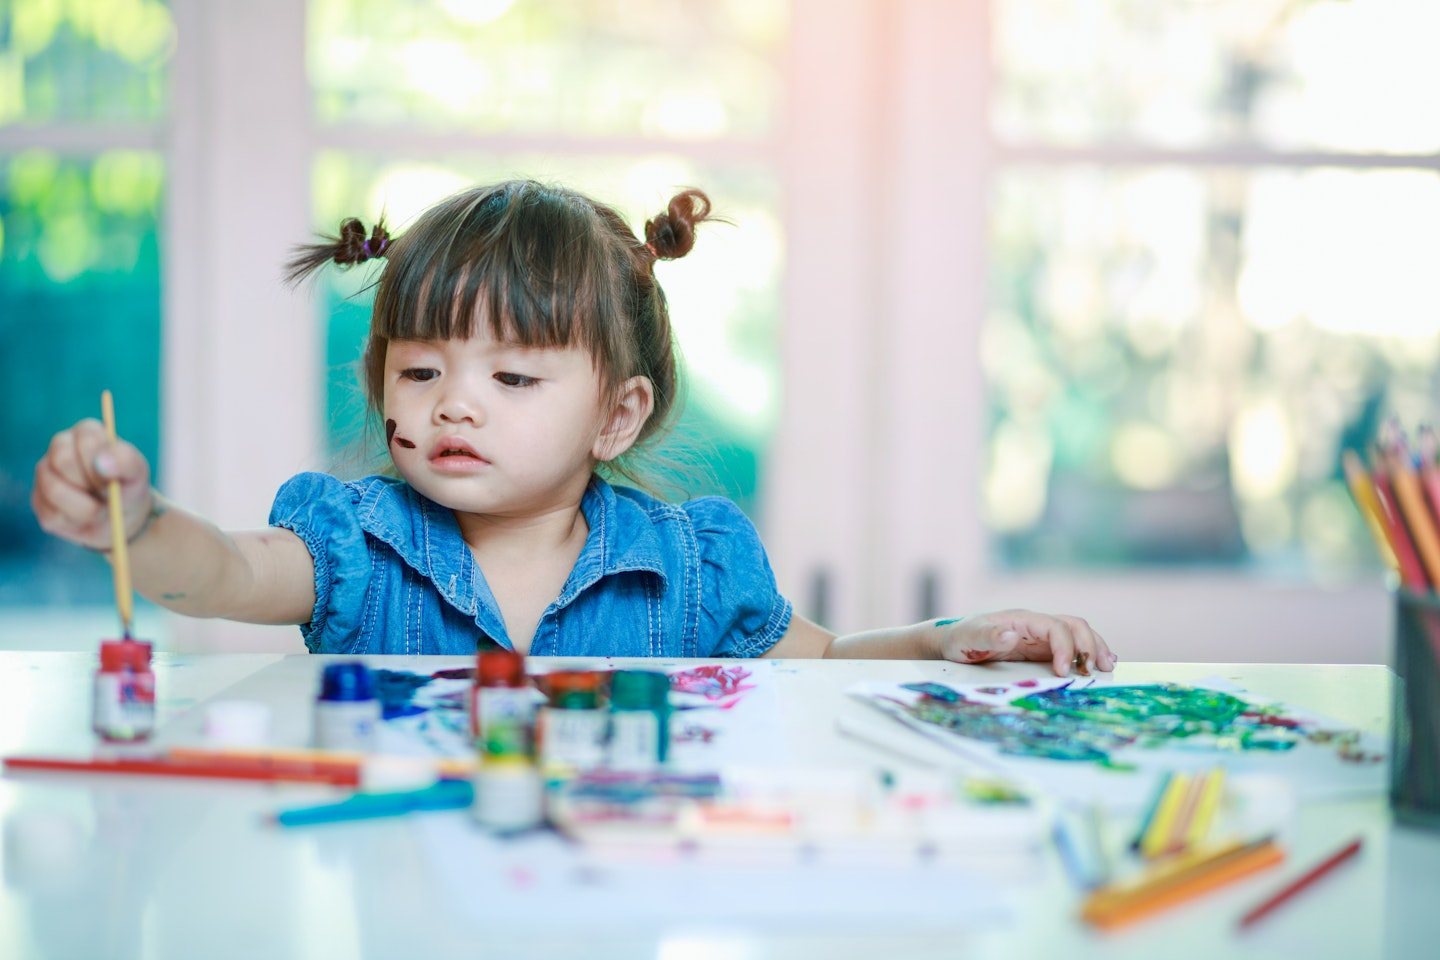 Easy crafts for toddlers